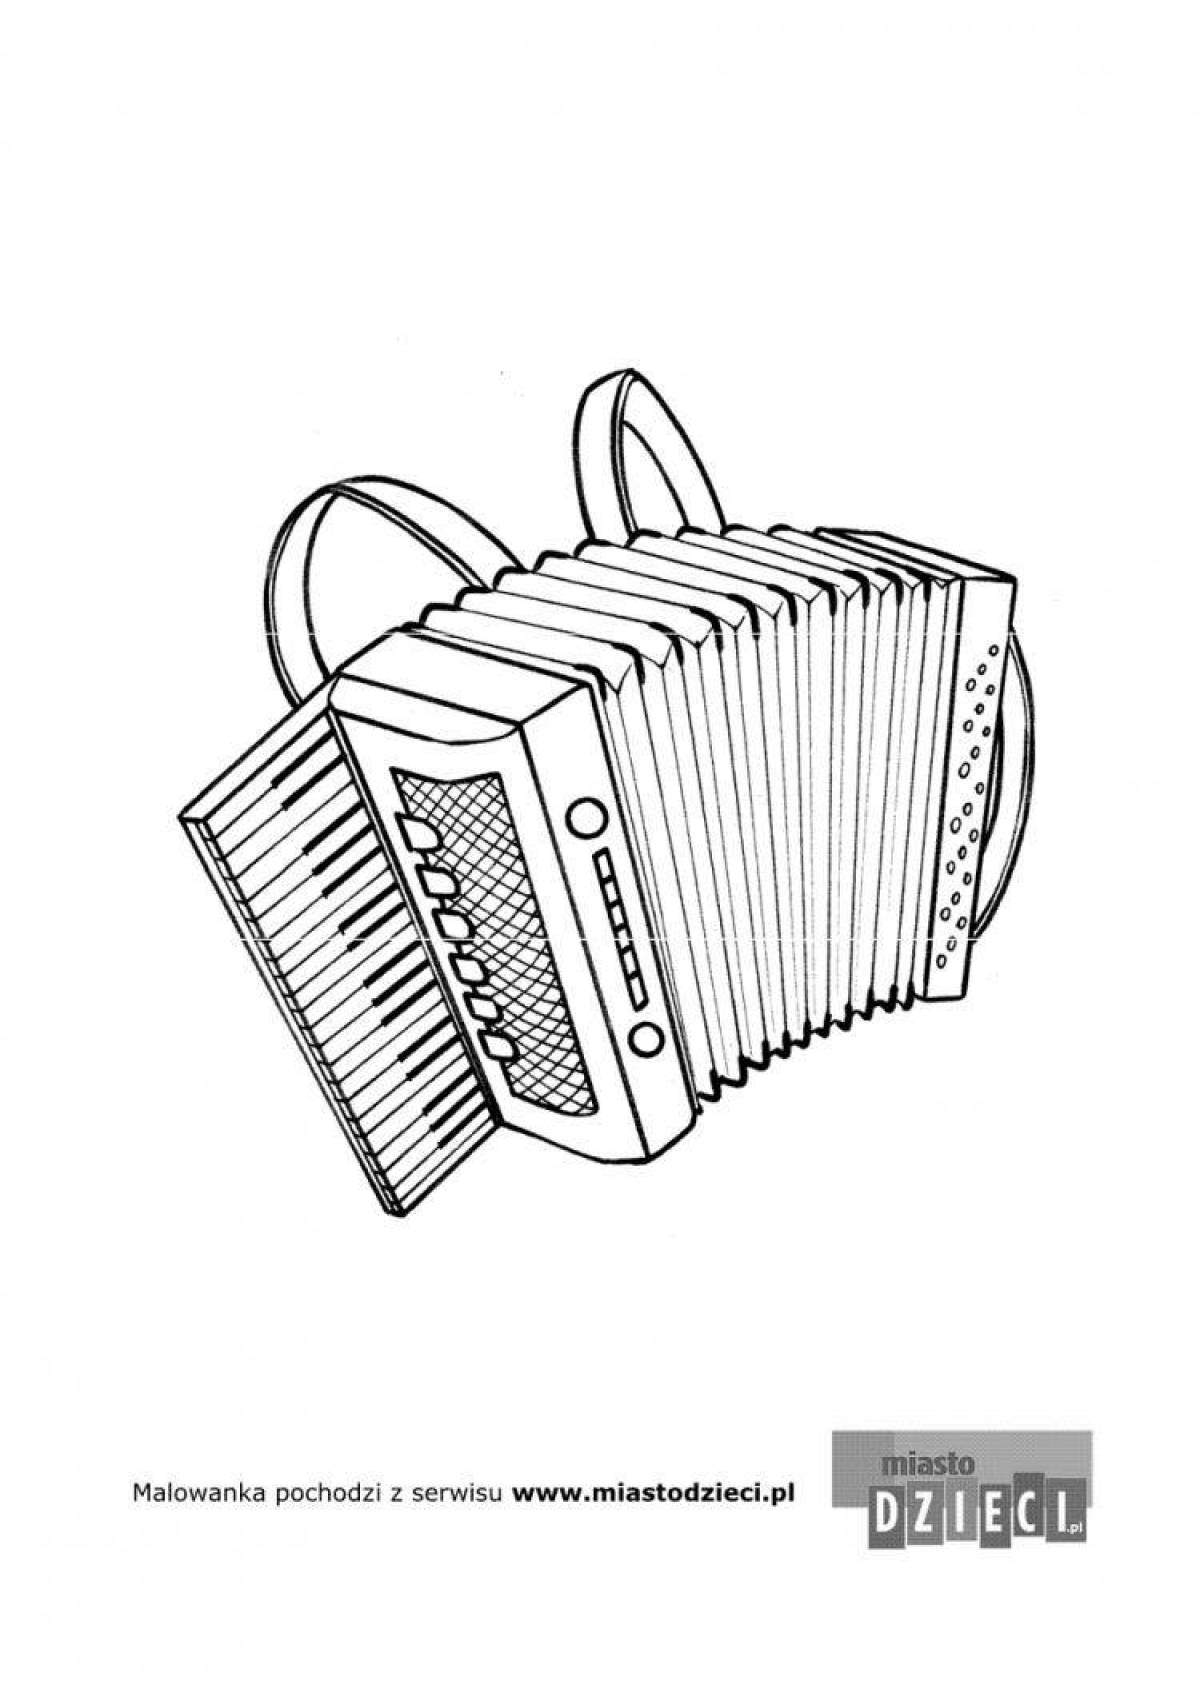 Exciting accordion coloring book for kids